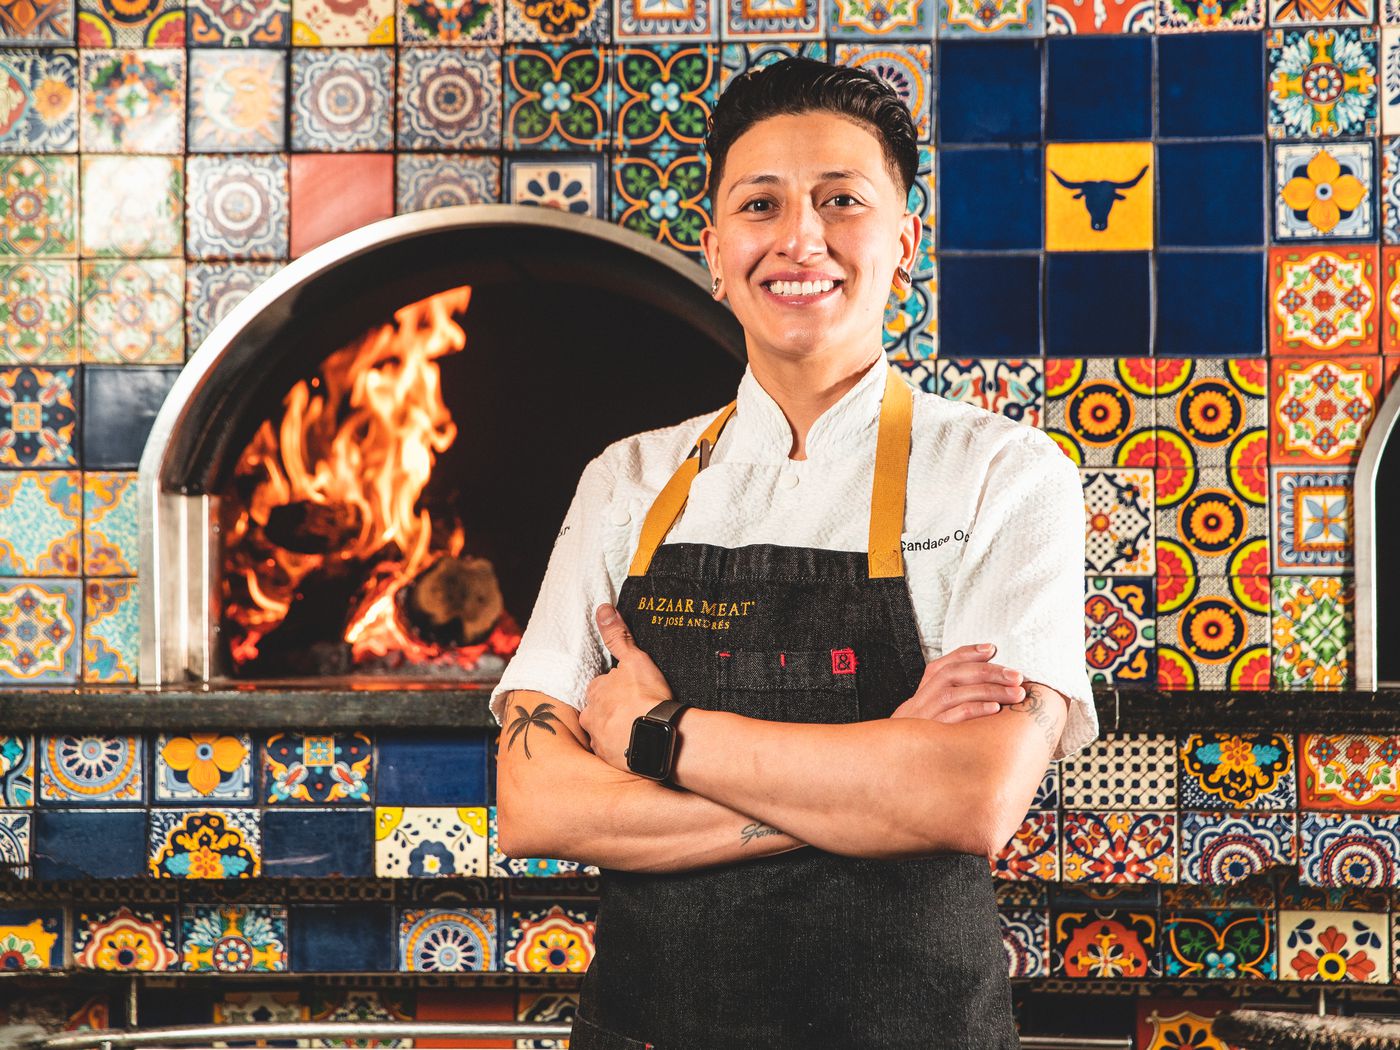 Candace ochoa takes over the kitchen at bazaar meat by josã andrãs